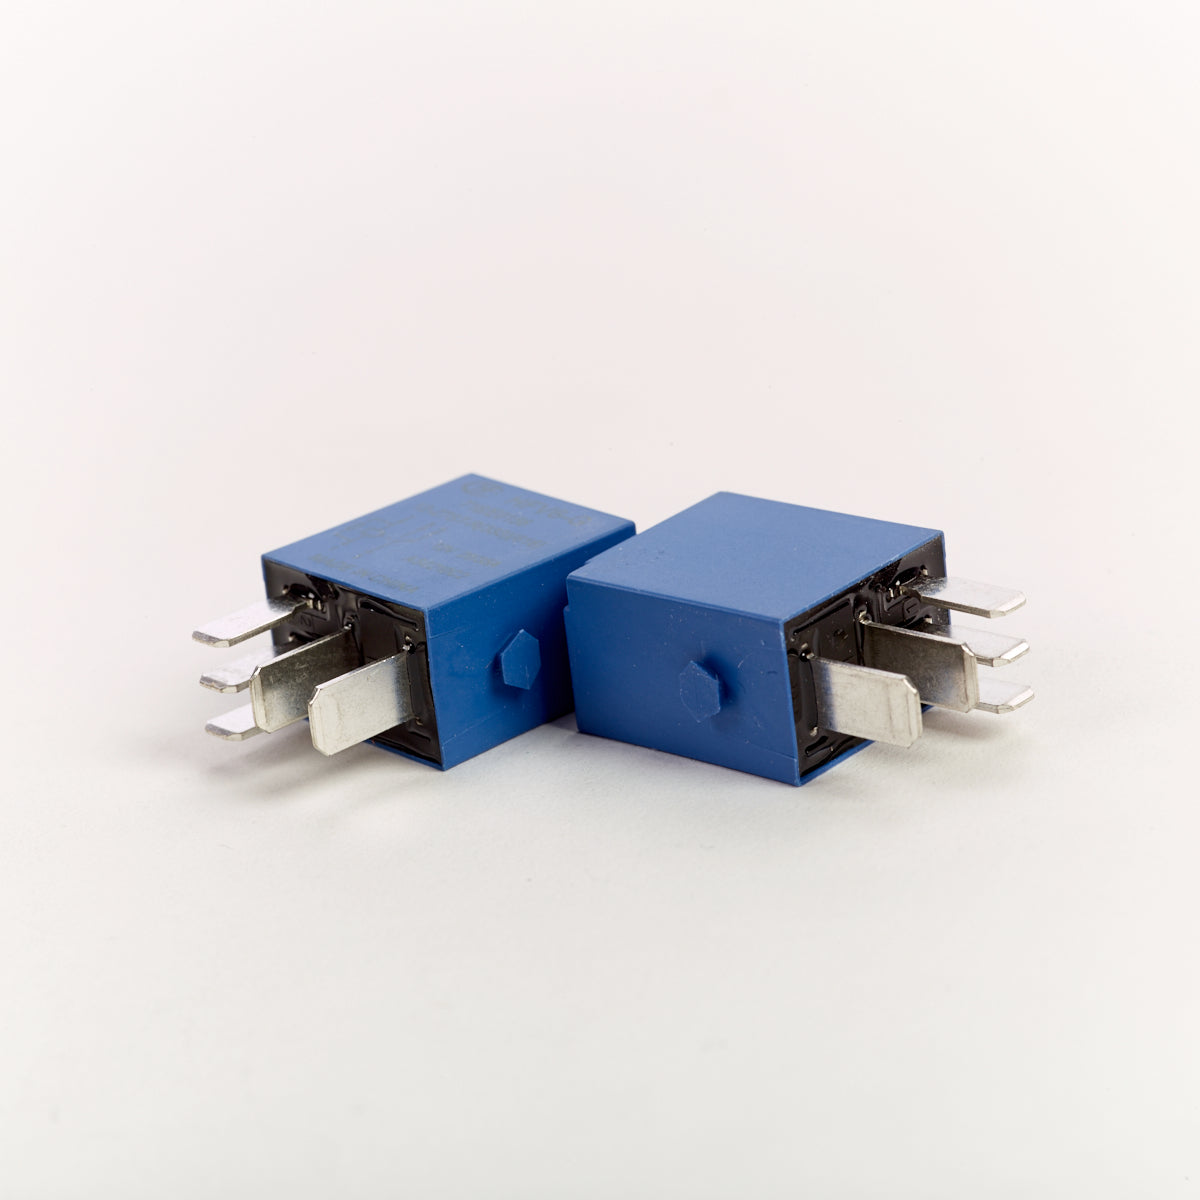 RELAY MICRO 35/20A 12V - BLUE (Pack of 2): 716/E0156